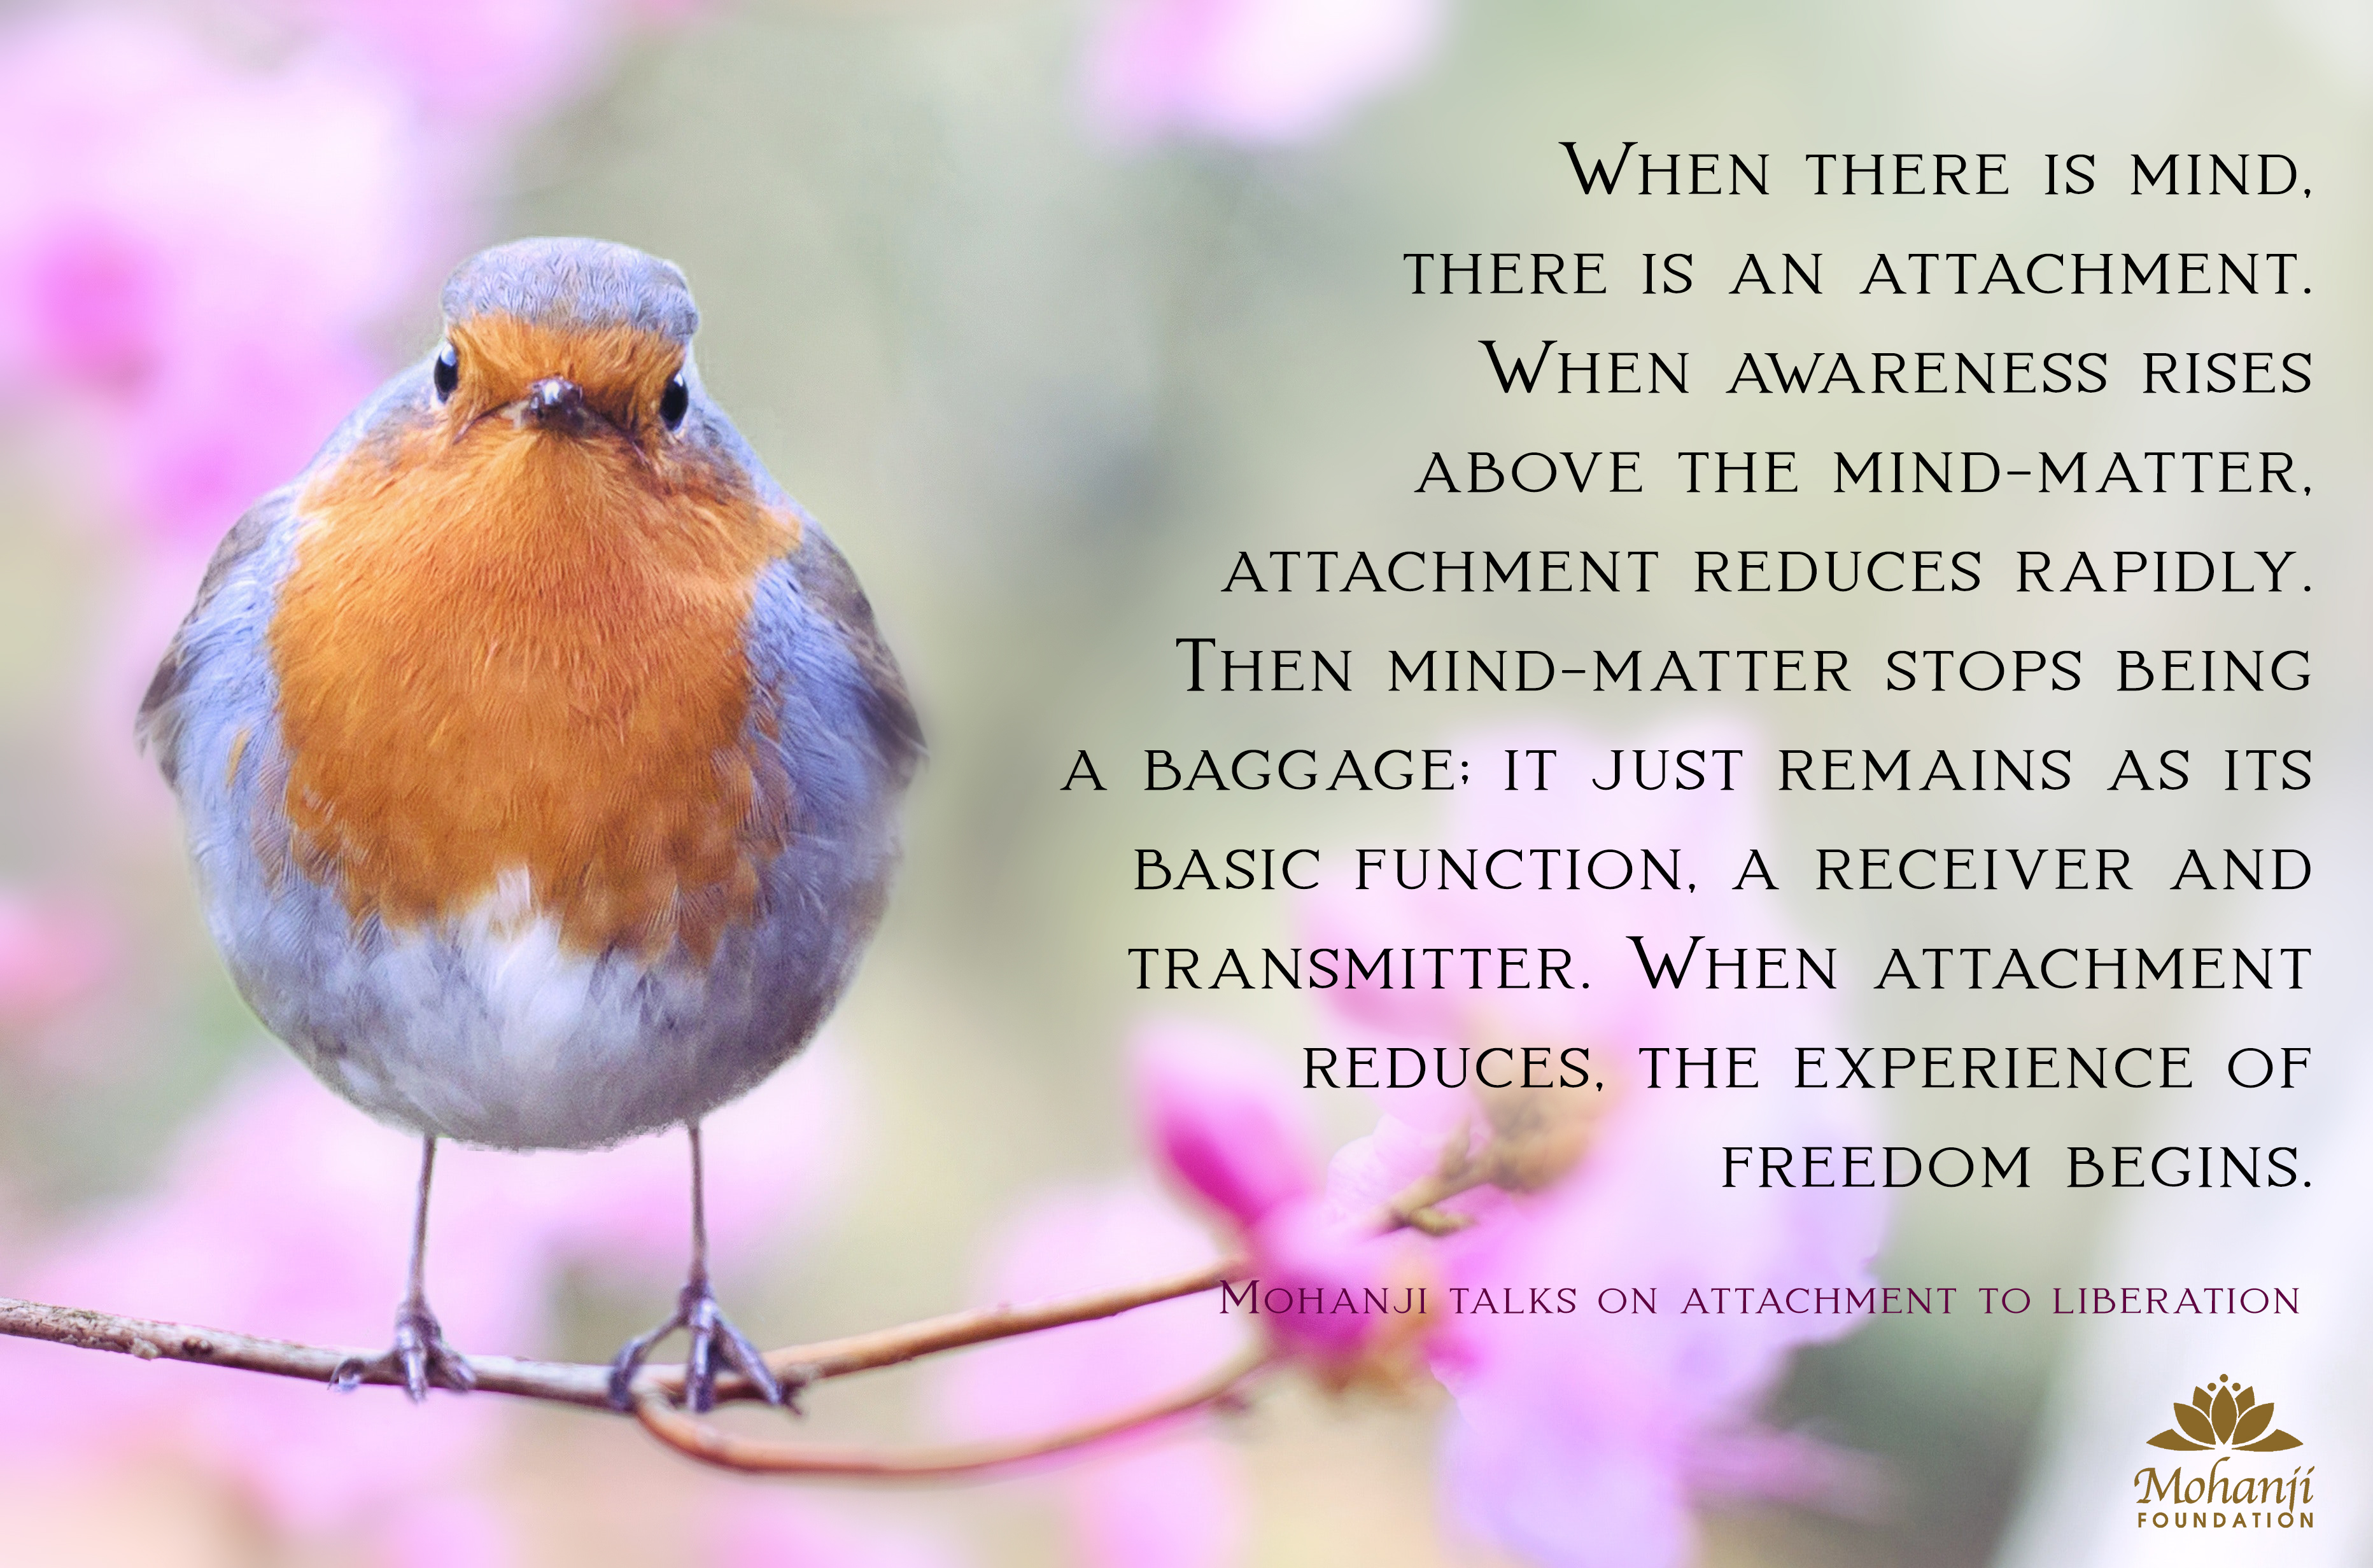 WHEN THERE IS MIND, THERE IS AN ATTACHMENT.
WHEN AWARENESS RISES ABOVE THE MIND-MATTER, ATTACHMENT REDUCES RAPIDLY.
THEN MIND-MATTER STOPS BEING A BAGGAGE. IT JUST REMANS AS ITS BASIC FUNCTION., A RECEIVER AND TRANSMITTER.
WHEN ATTACHMENT REDUCES, THE EXPERIENCE OF FREEDOM BEGINS."
-MOHANJI TALKS ON ATTACHMENT TO LIBERATION